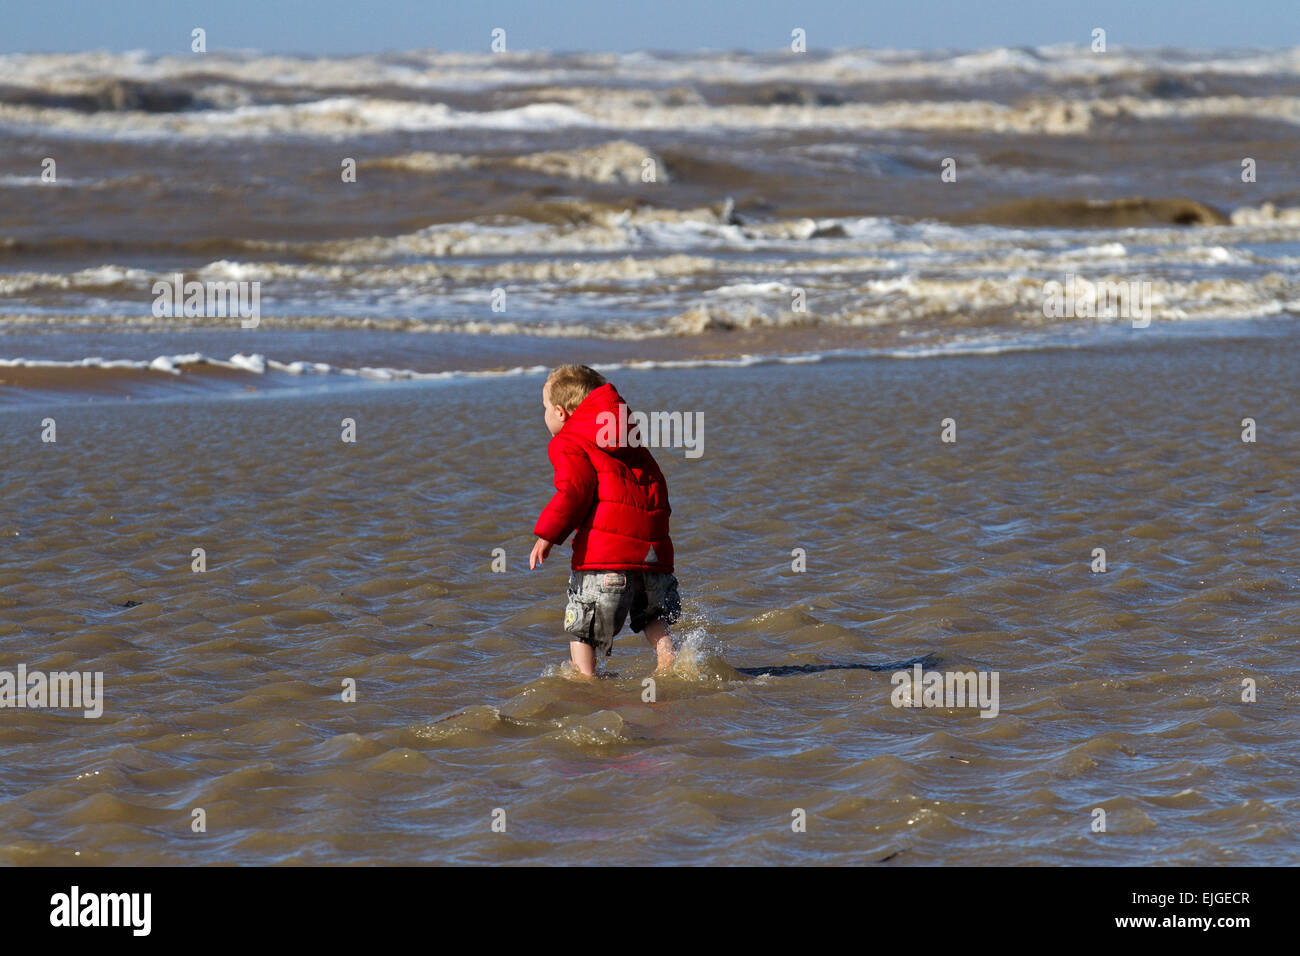 Southport, Merseyside, UK. 26th March, 2015. UK Weather: High Tides & High Winds at Ainsdale. Little boy, 4 years old, enjoying a paddle in the incoming tide from the Irish Sea on the west coast.  Credit:  Mar Photographics/Alamy Live News Stock Photo